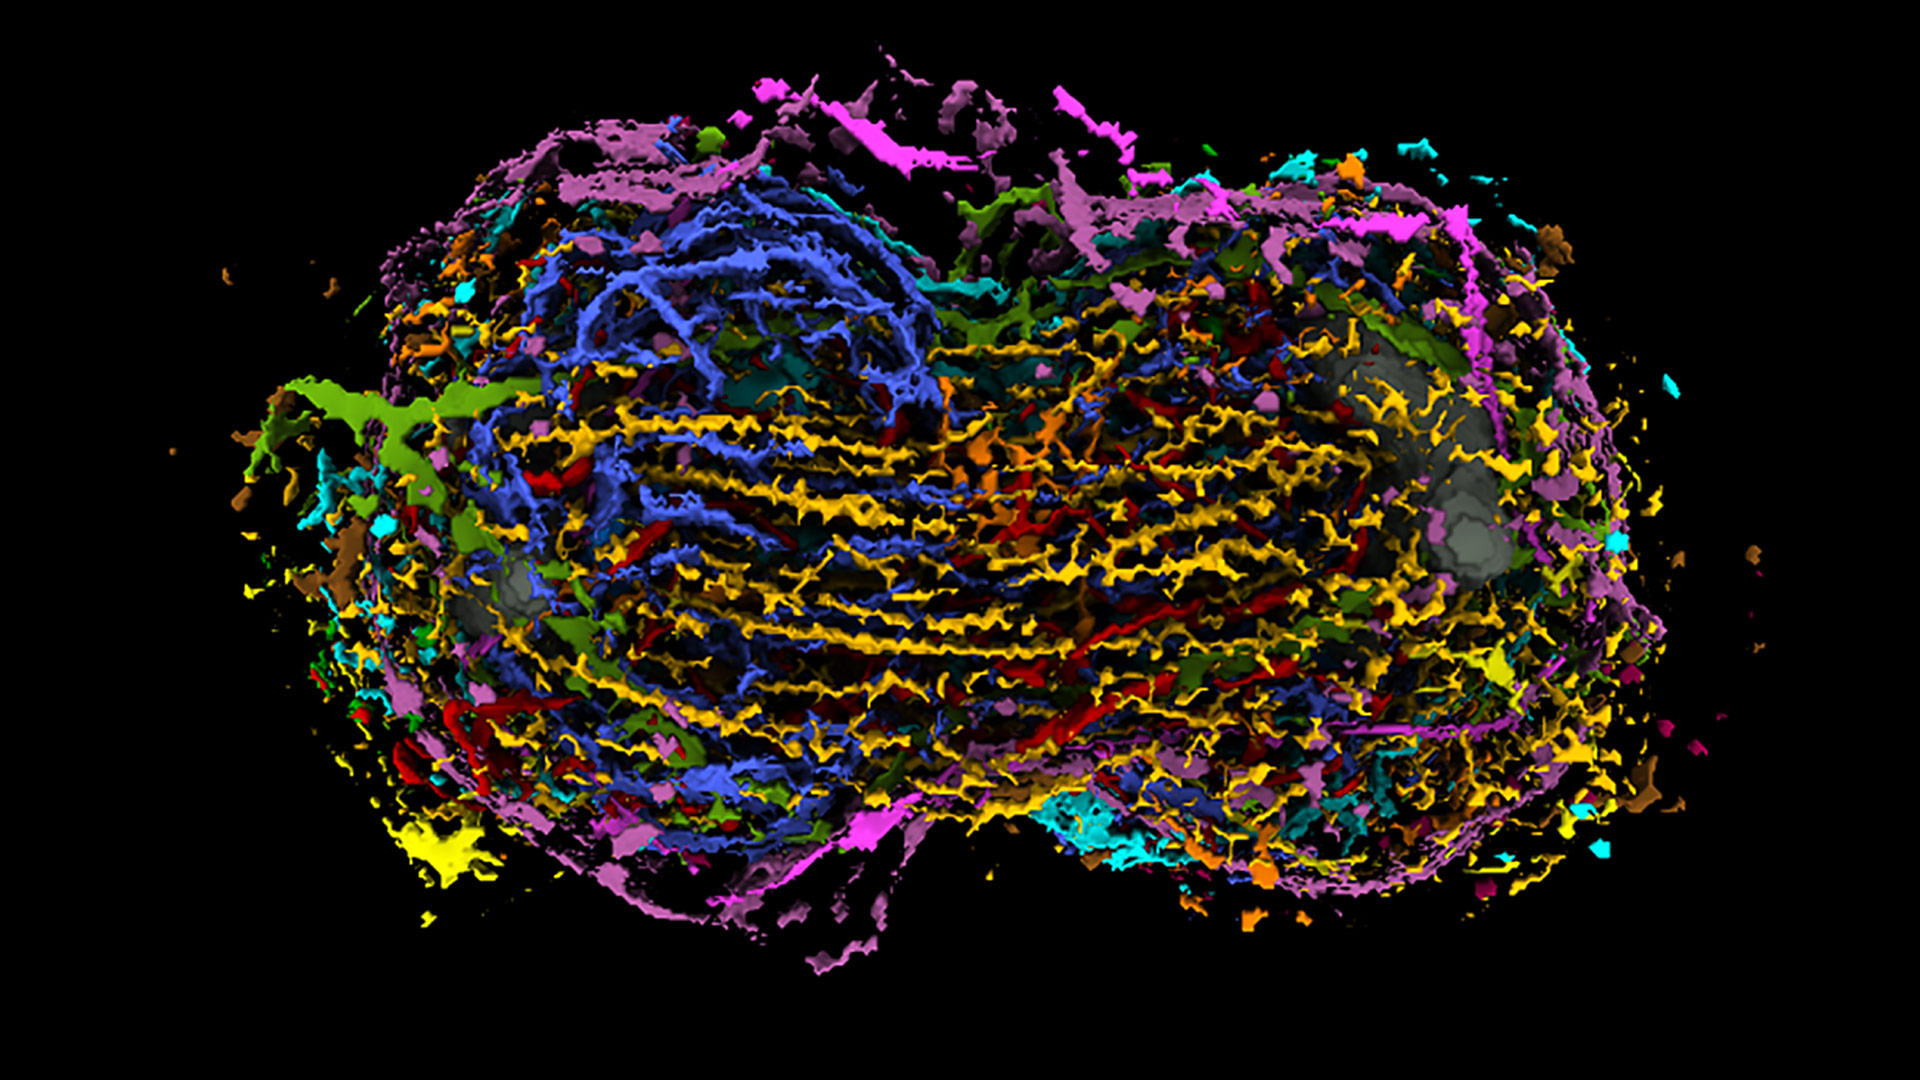 Integrated Mitotic Stem Cell by the Allen Institute for Cell Science showing key cellular structures during mitosis